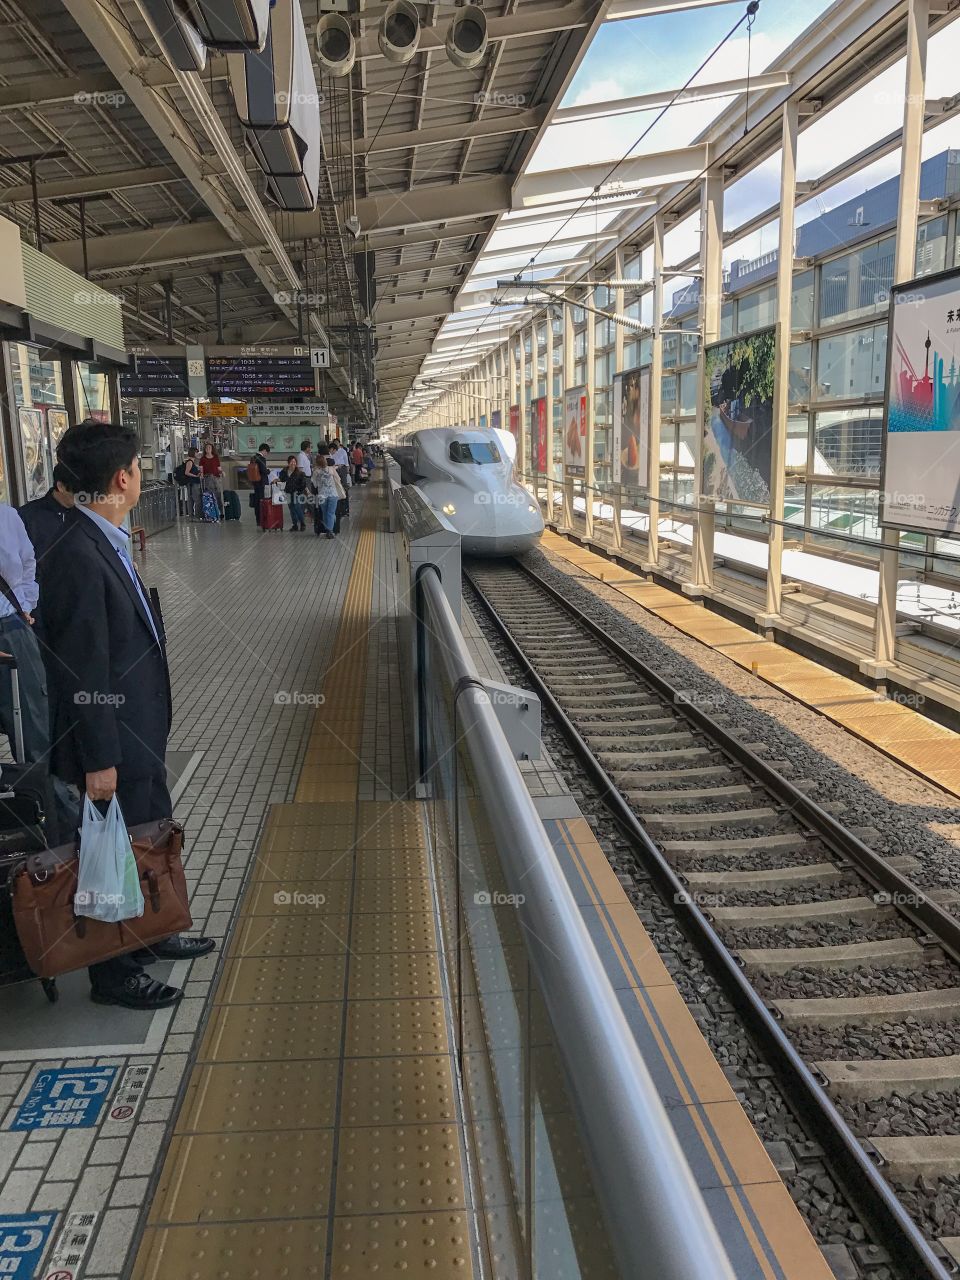 Waiting for the arrival of Shinkansen; the iconic Bullet trains of Japan...